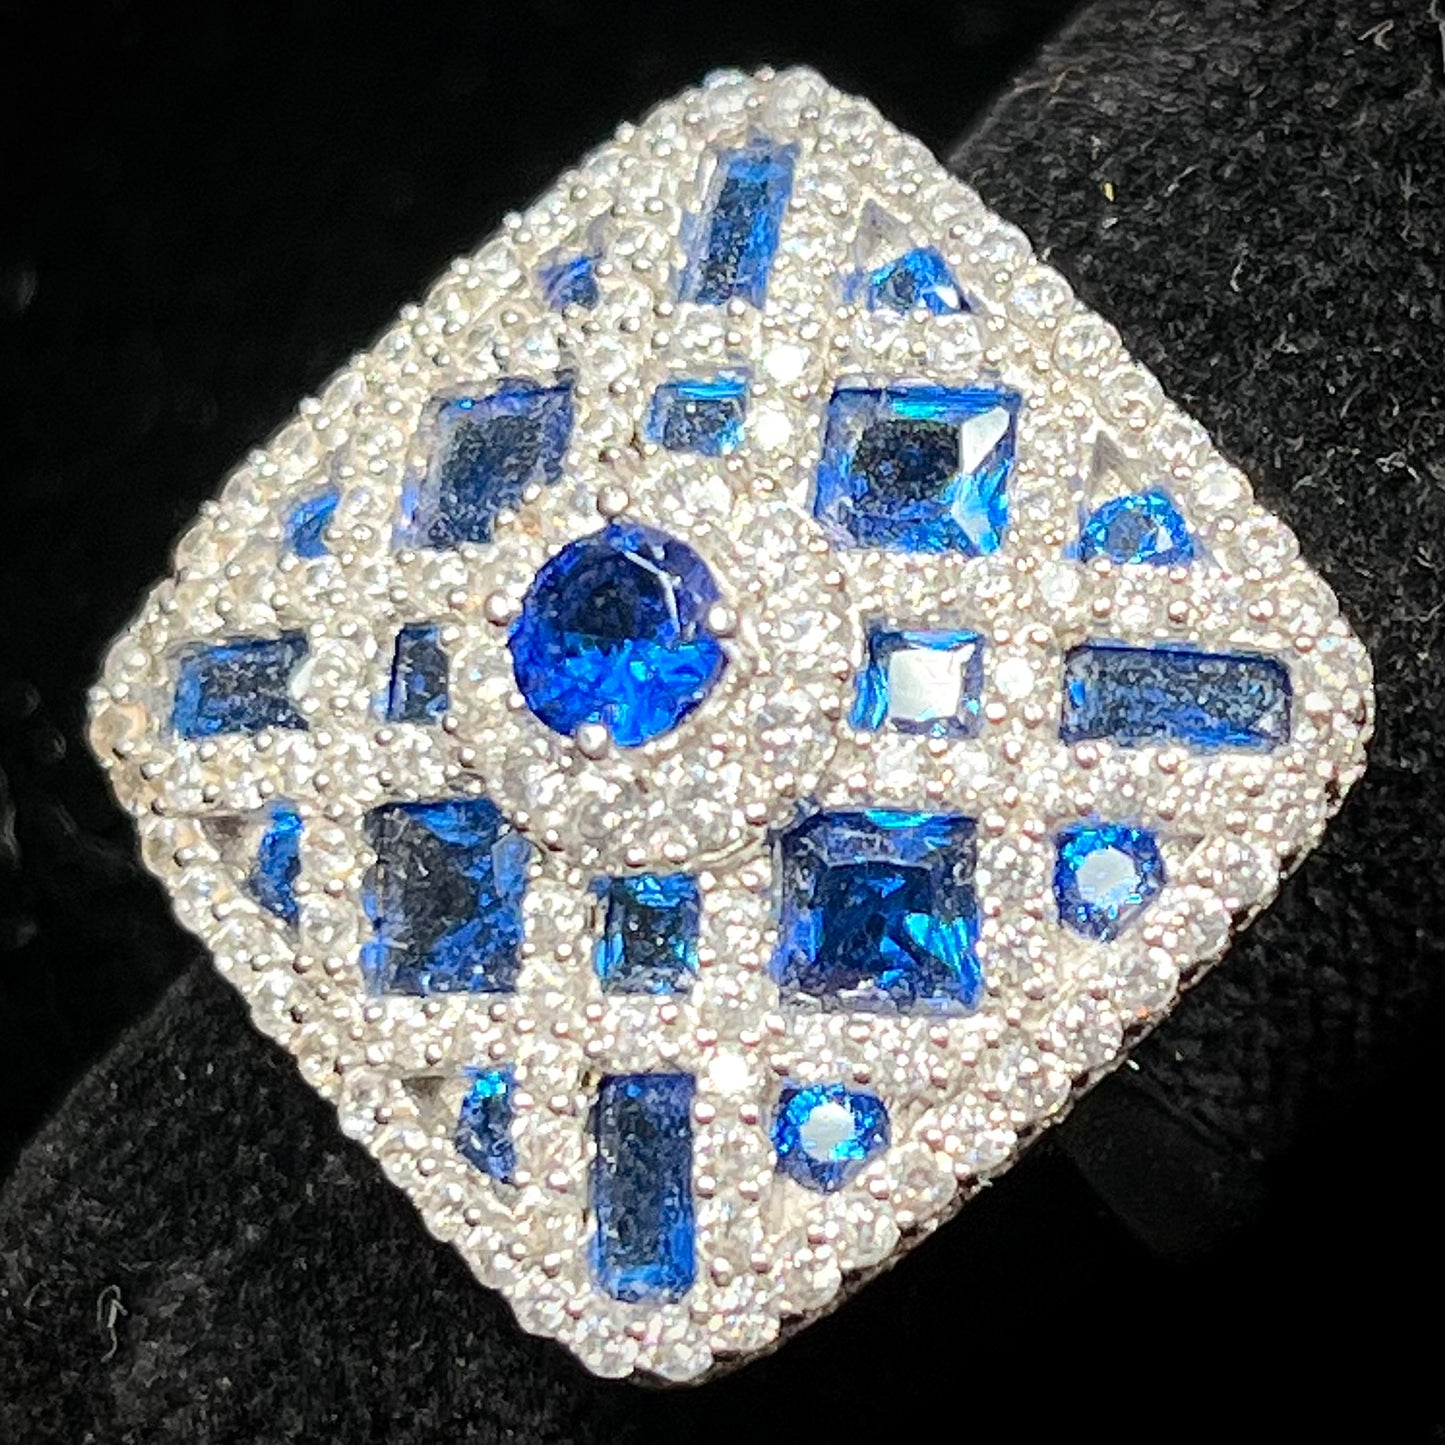 A sterling silver blue and white synthetic stone ring.  The ring strongly resembles a blueberry pie.